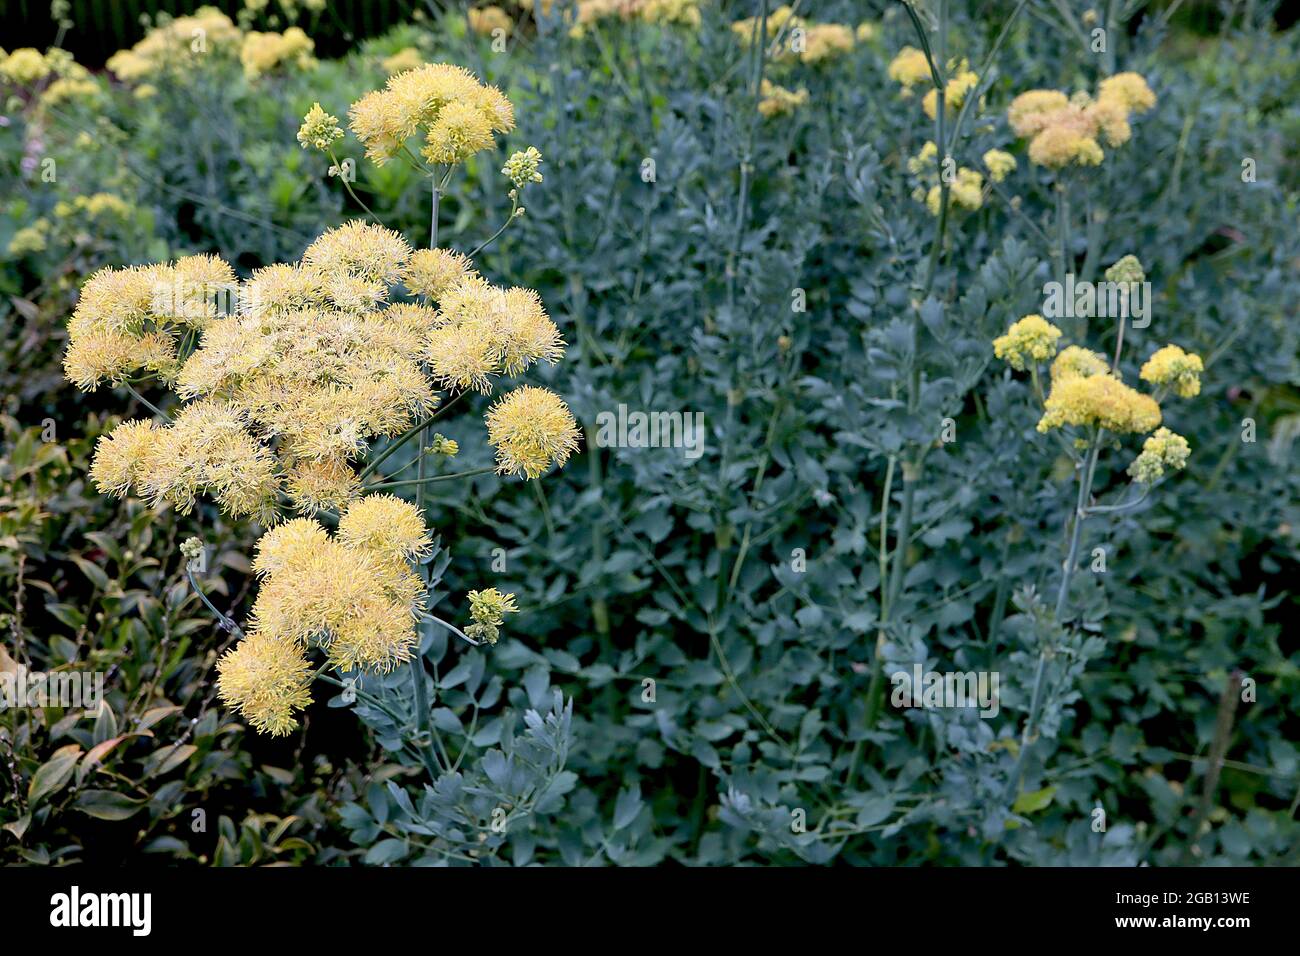 Thalictrum flavum subsp glaucum yellow meadow rue – fluffy yellow flowers atop very tall stems and grey green leaves,  June, England, UK Stock Photo